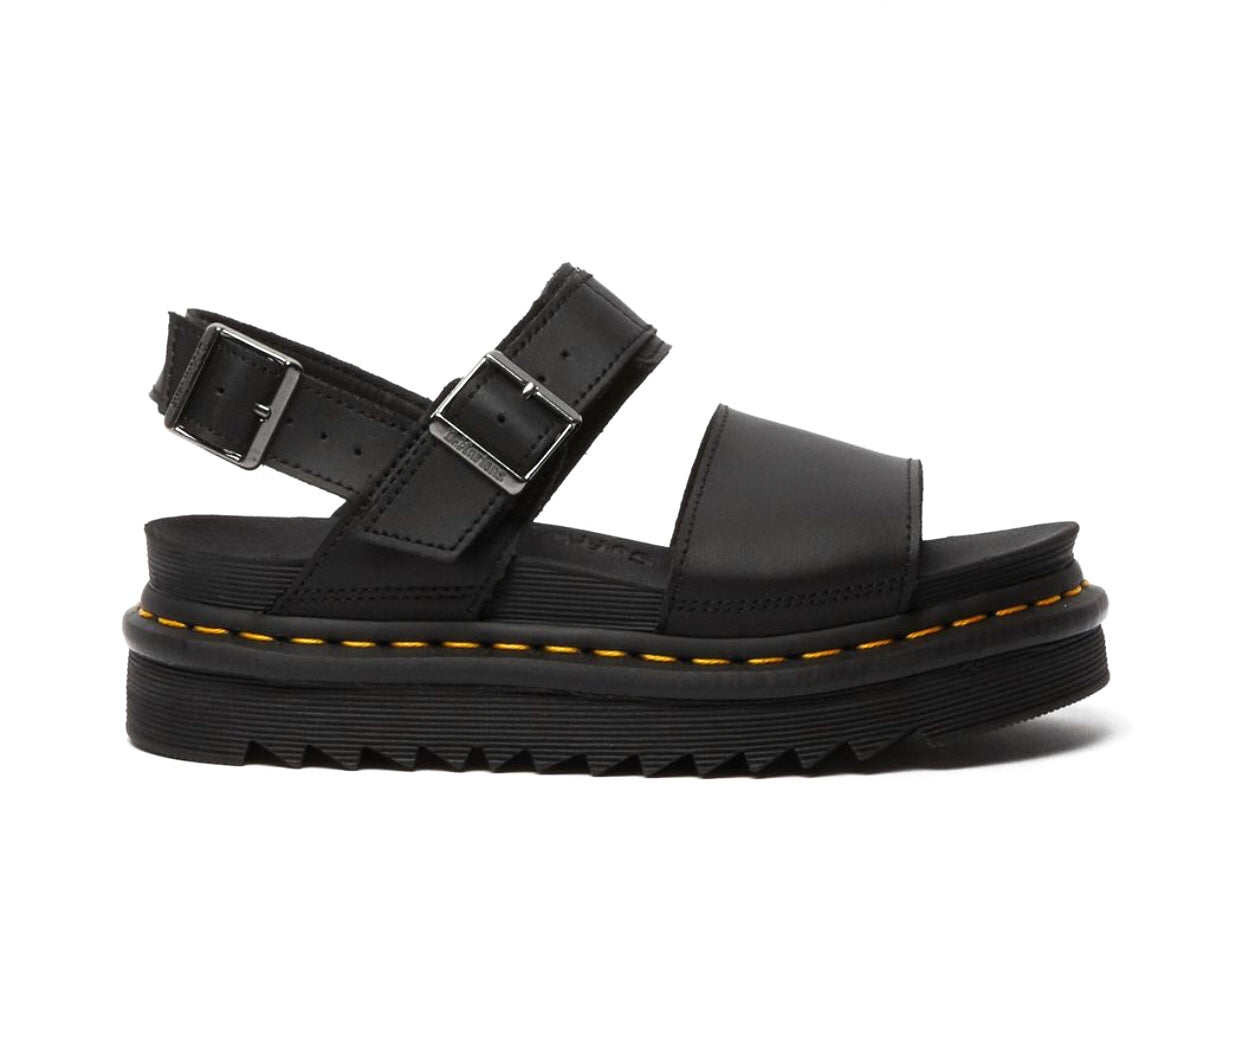 Dr. Martens Voss Black Hydro Leather Yellow Stitch Sandal